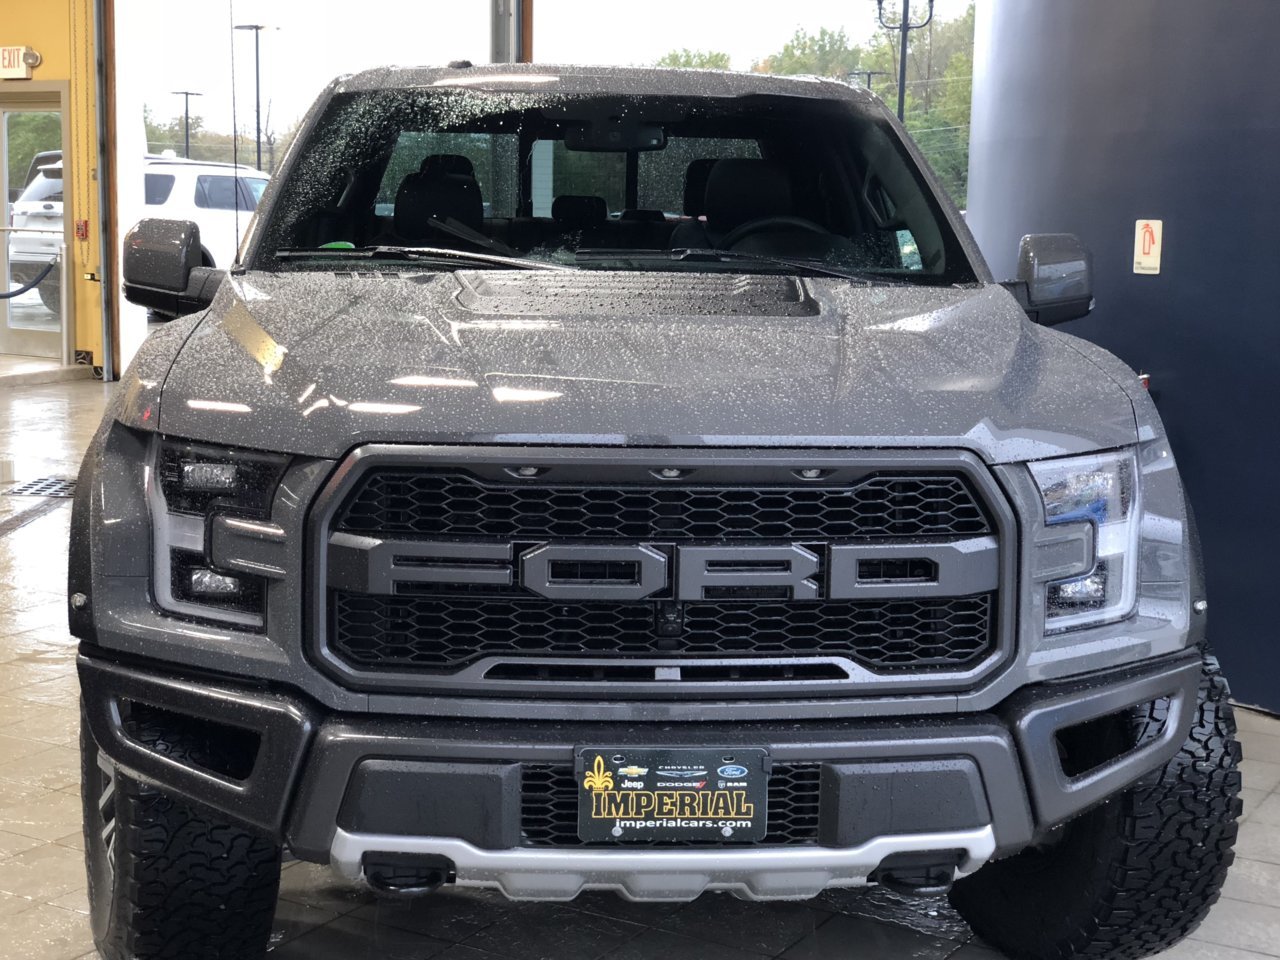 Sold Taco, bought a Raptor | Page 6 | Tacoma World